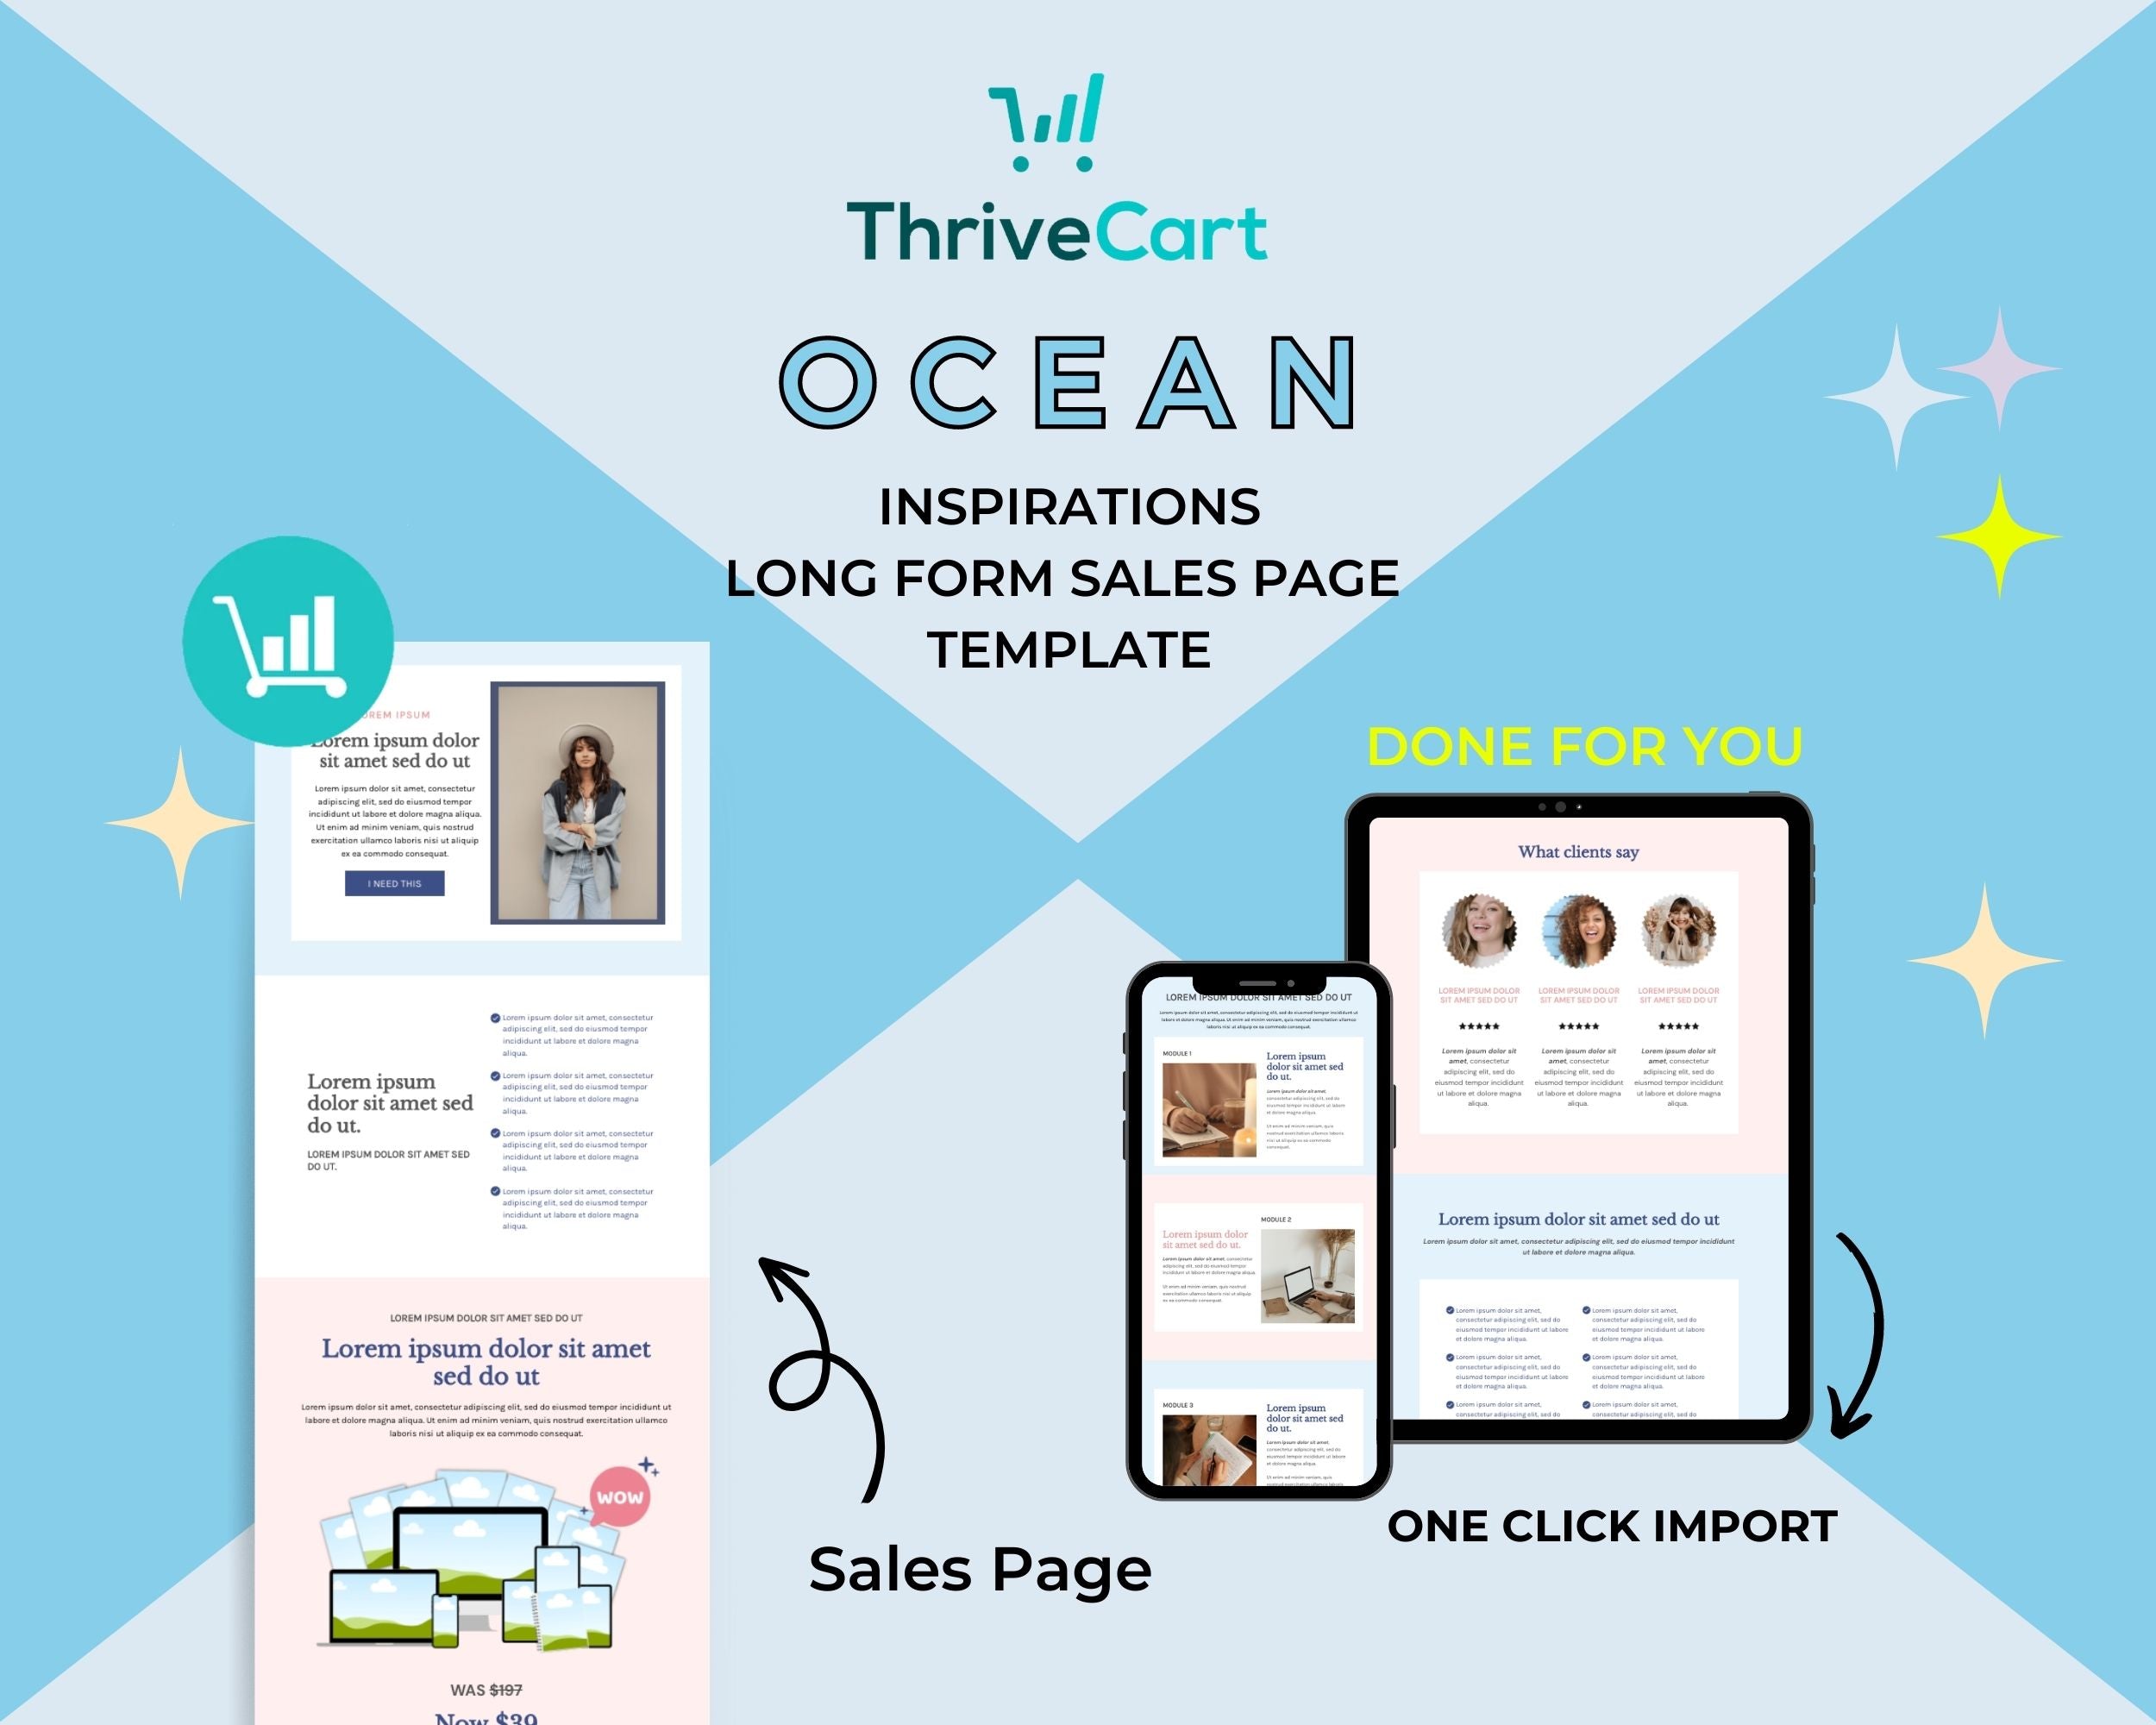 Ocean Inspirations Sales Page Template in ThriveCart